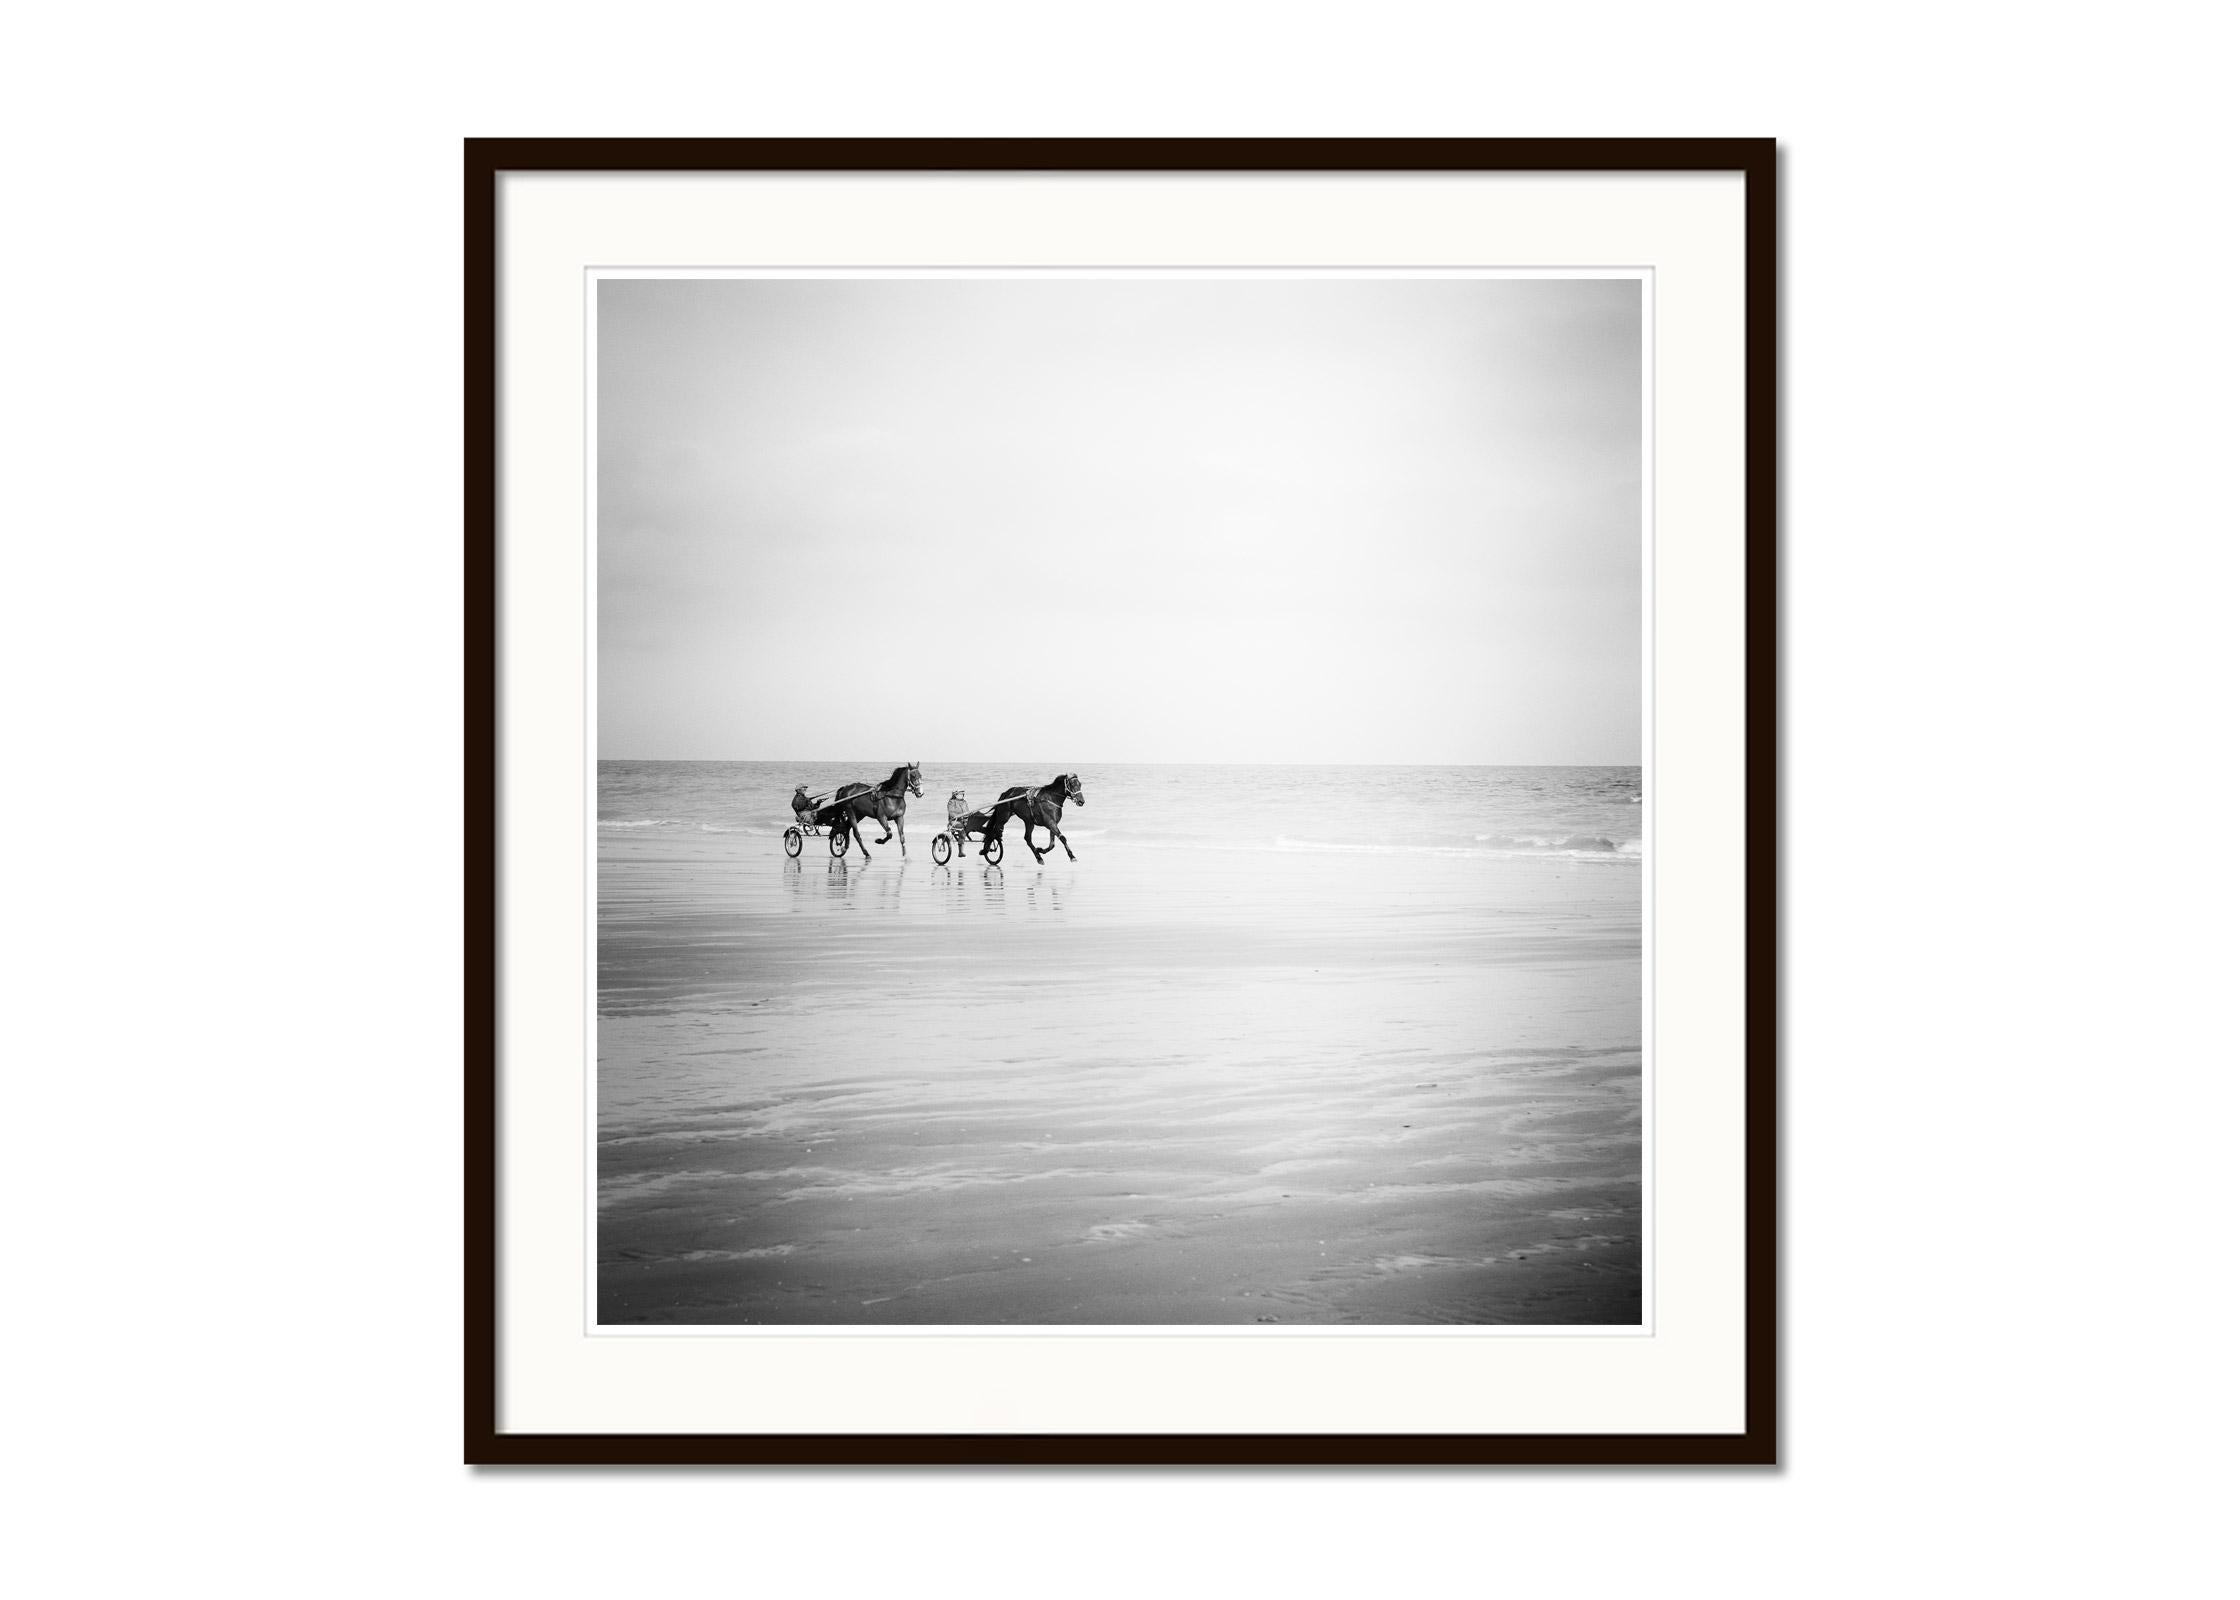 Harness Racing, horses on the beach, France, black white landscape photography - Gray Landscape Photograph by Gerald Berghammer